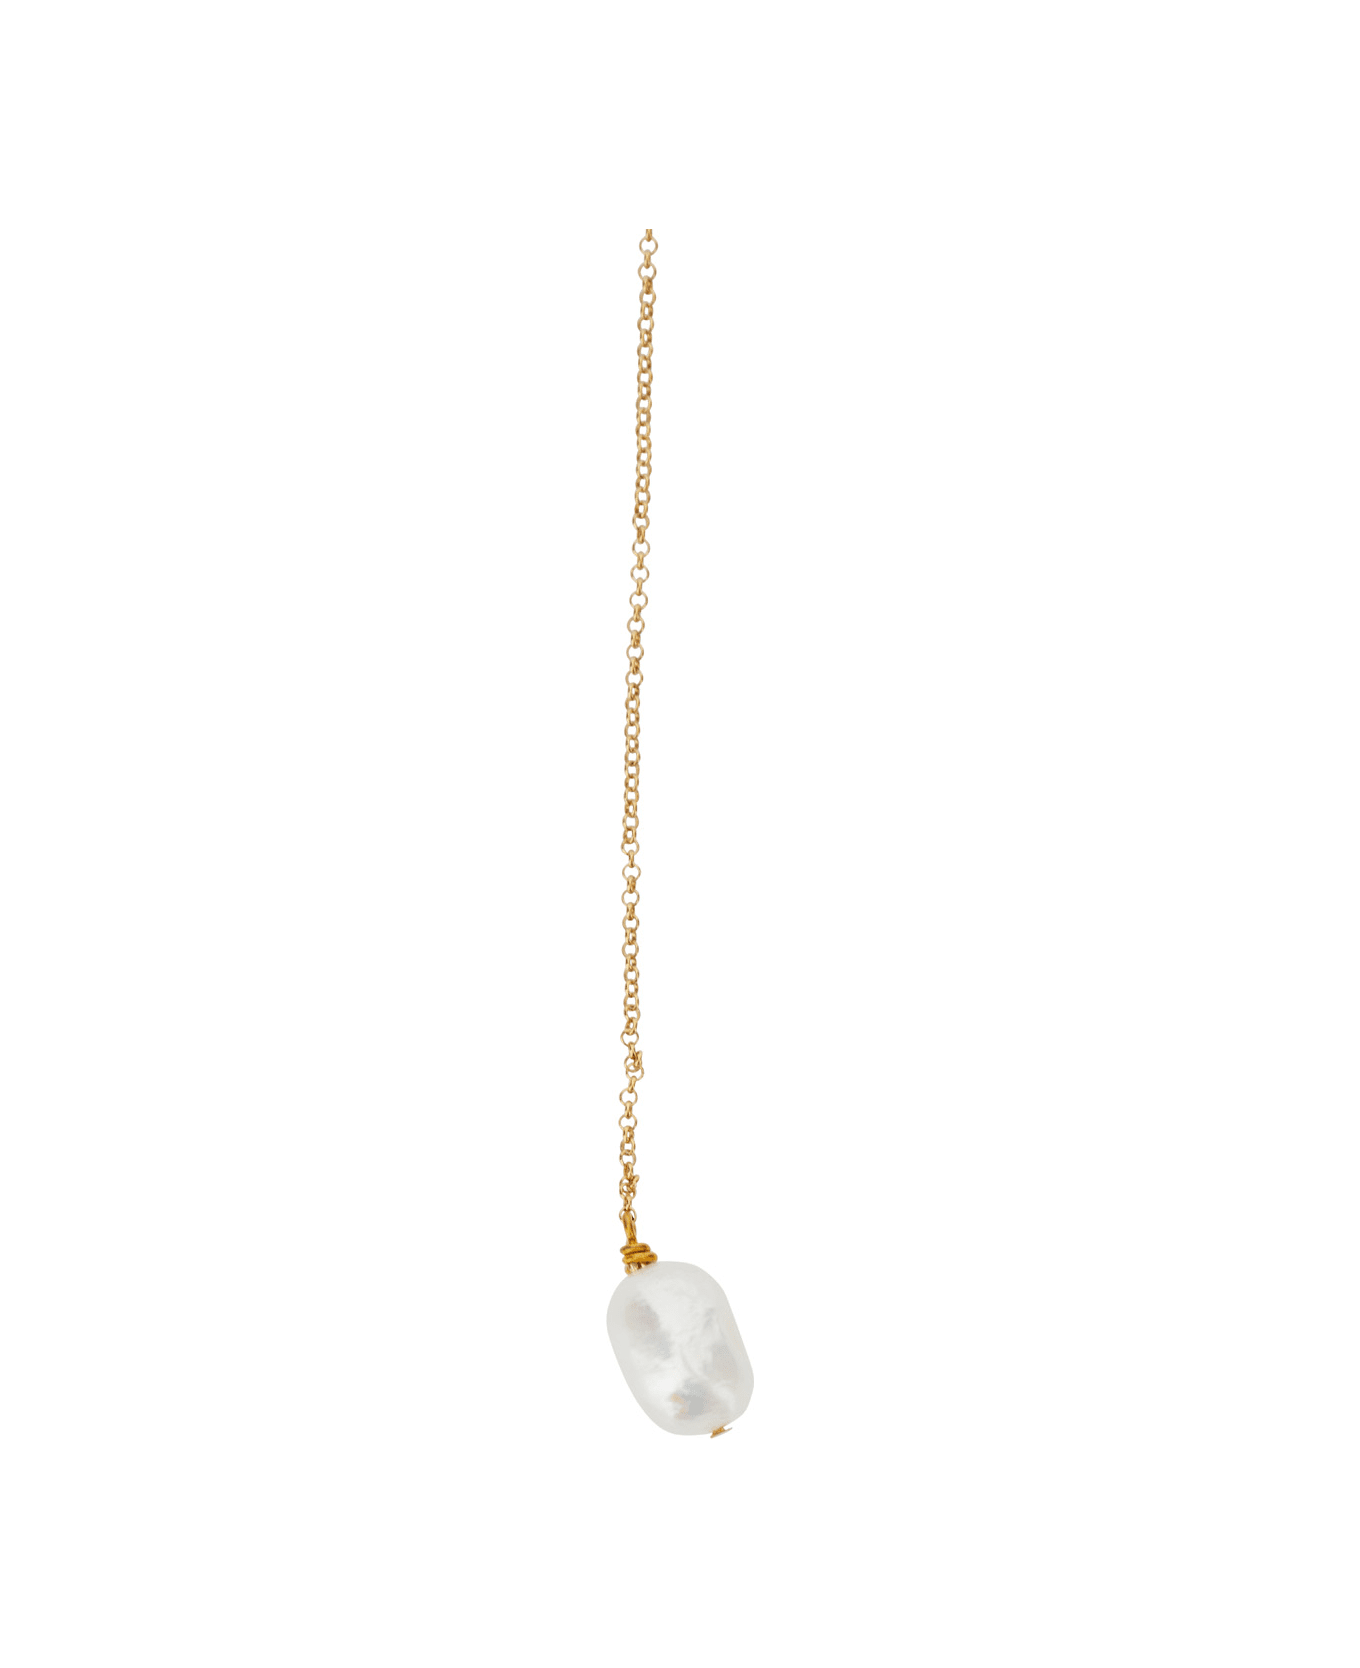 Forte_Forte Gold Tone Necklace With Pearl Detail In Bronze Woman - Metallic ネックレス